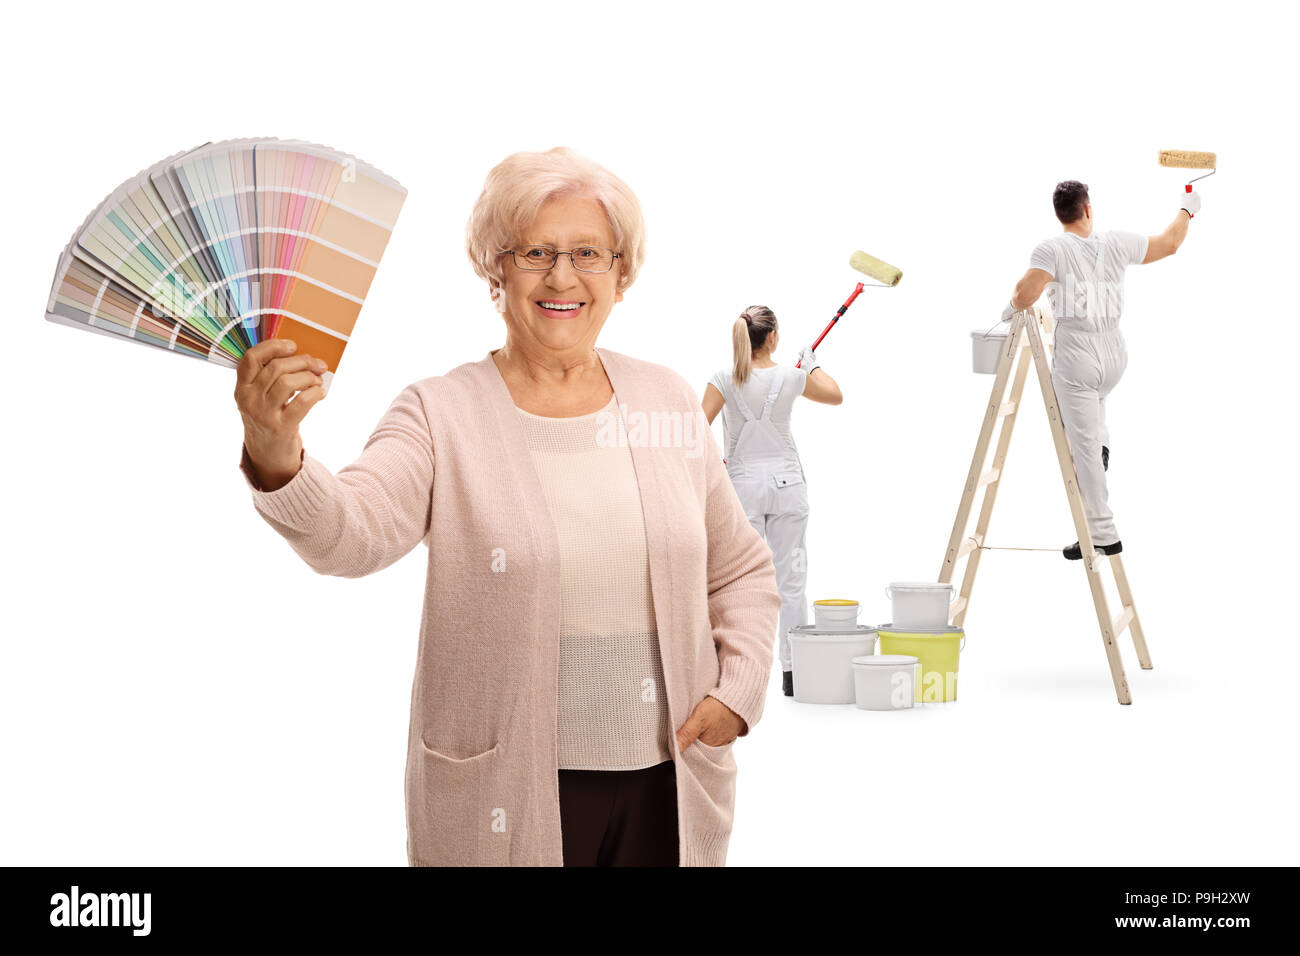 Mature woman holding a color swatch with two painters painting behind her isolated on white background Stock Photo